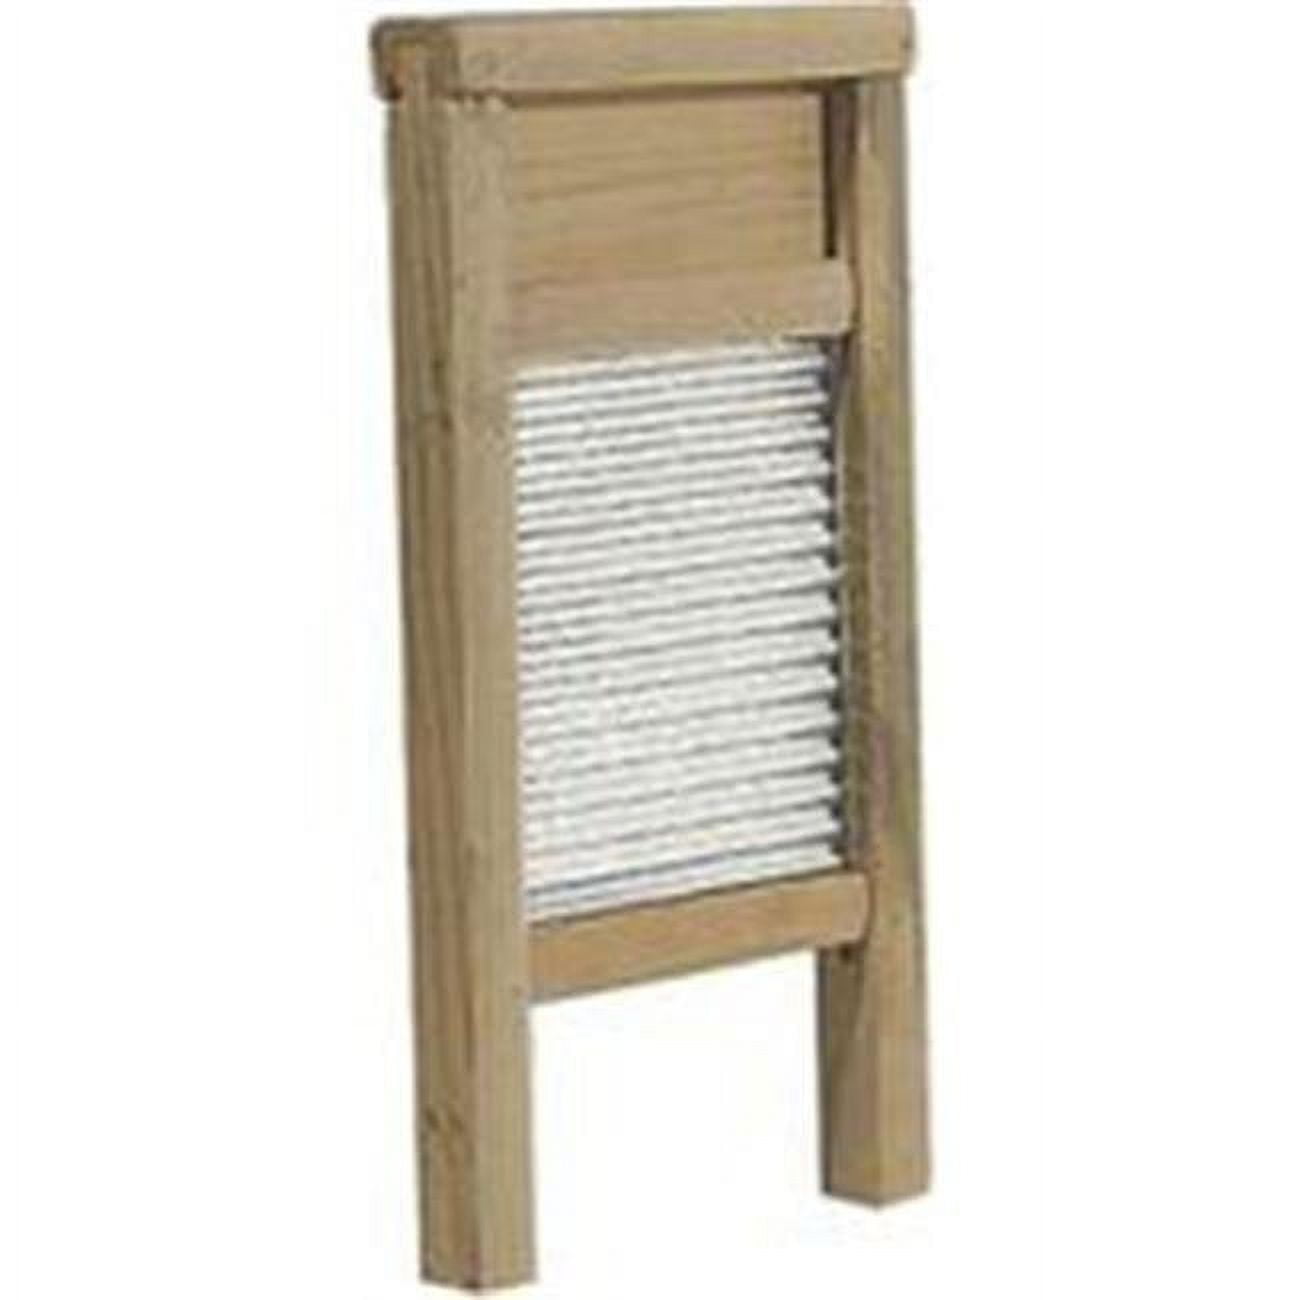 Behrens Galvanized Steel & Wood Frame Washboard Scrubbing Surface For Hand  Washing Clothes, Manual Laundry Washing Machine Station, Large : Target